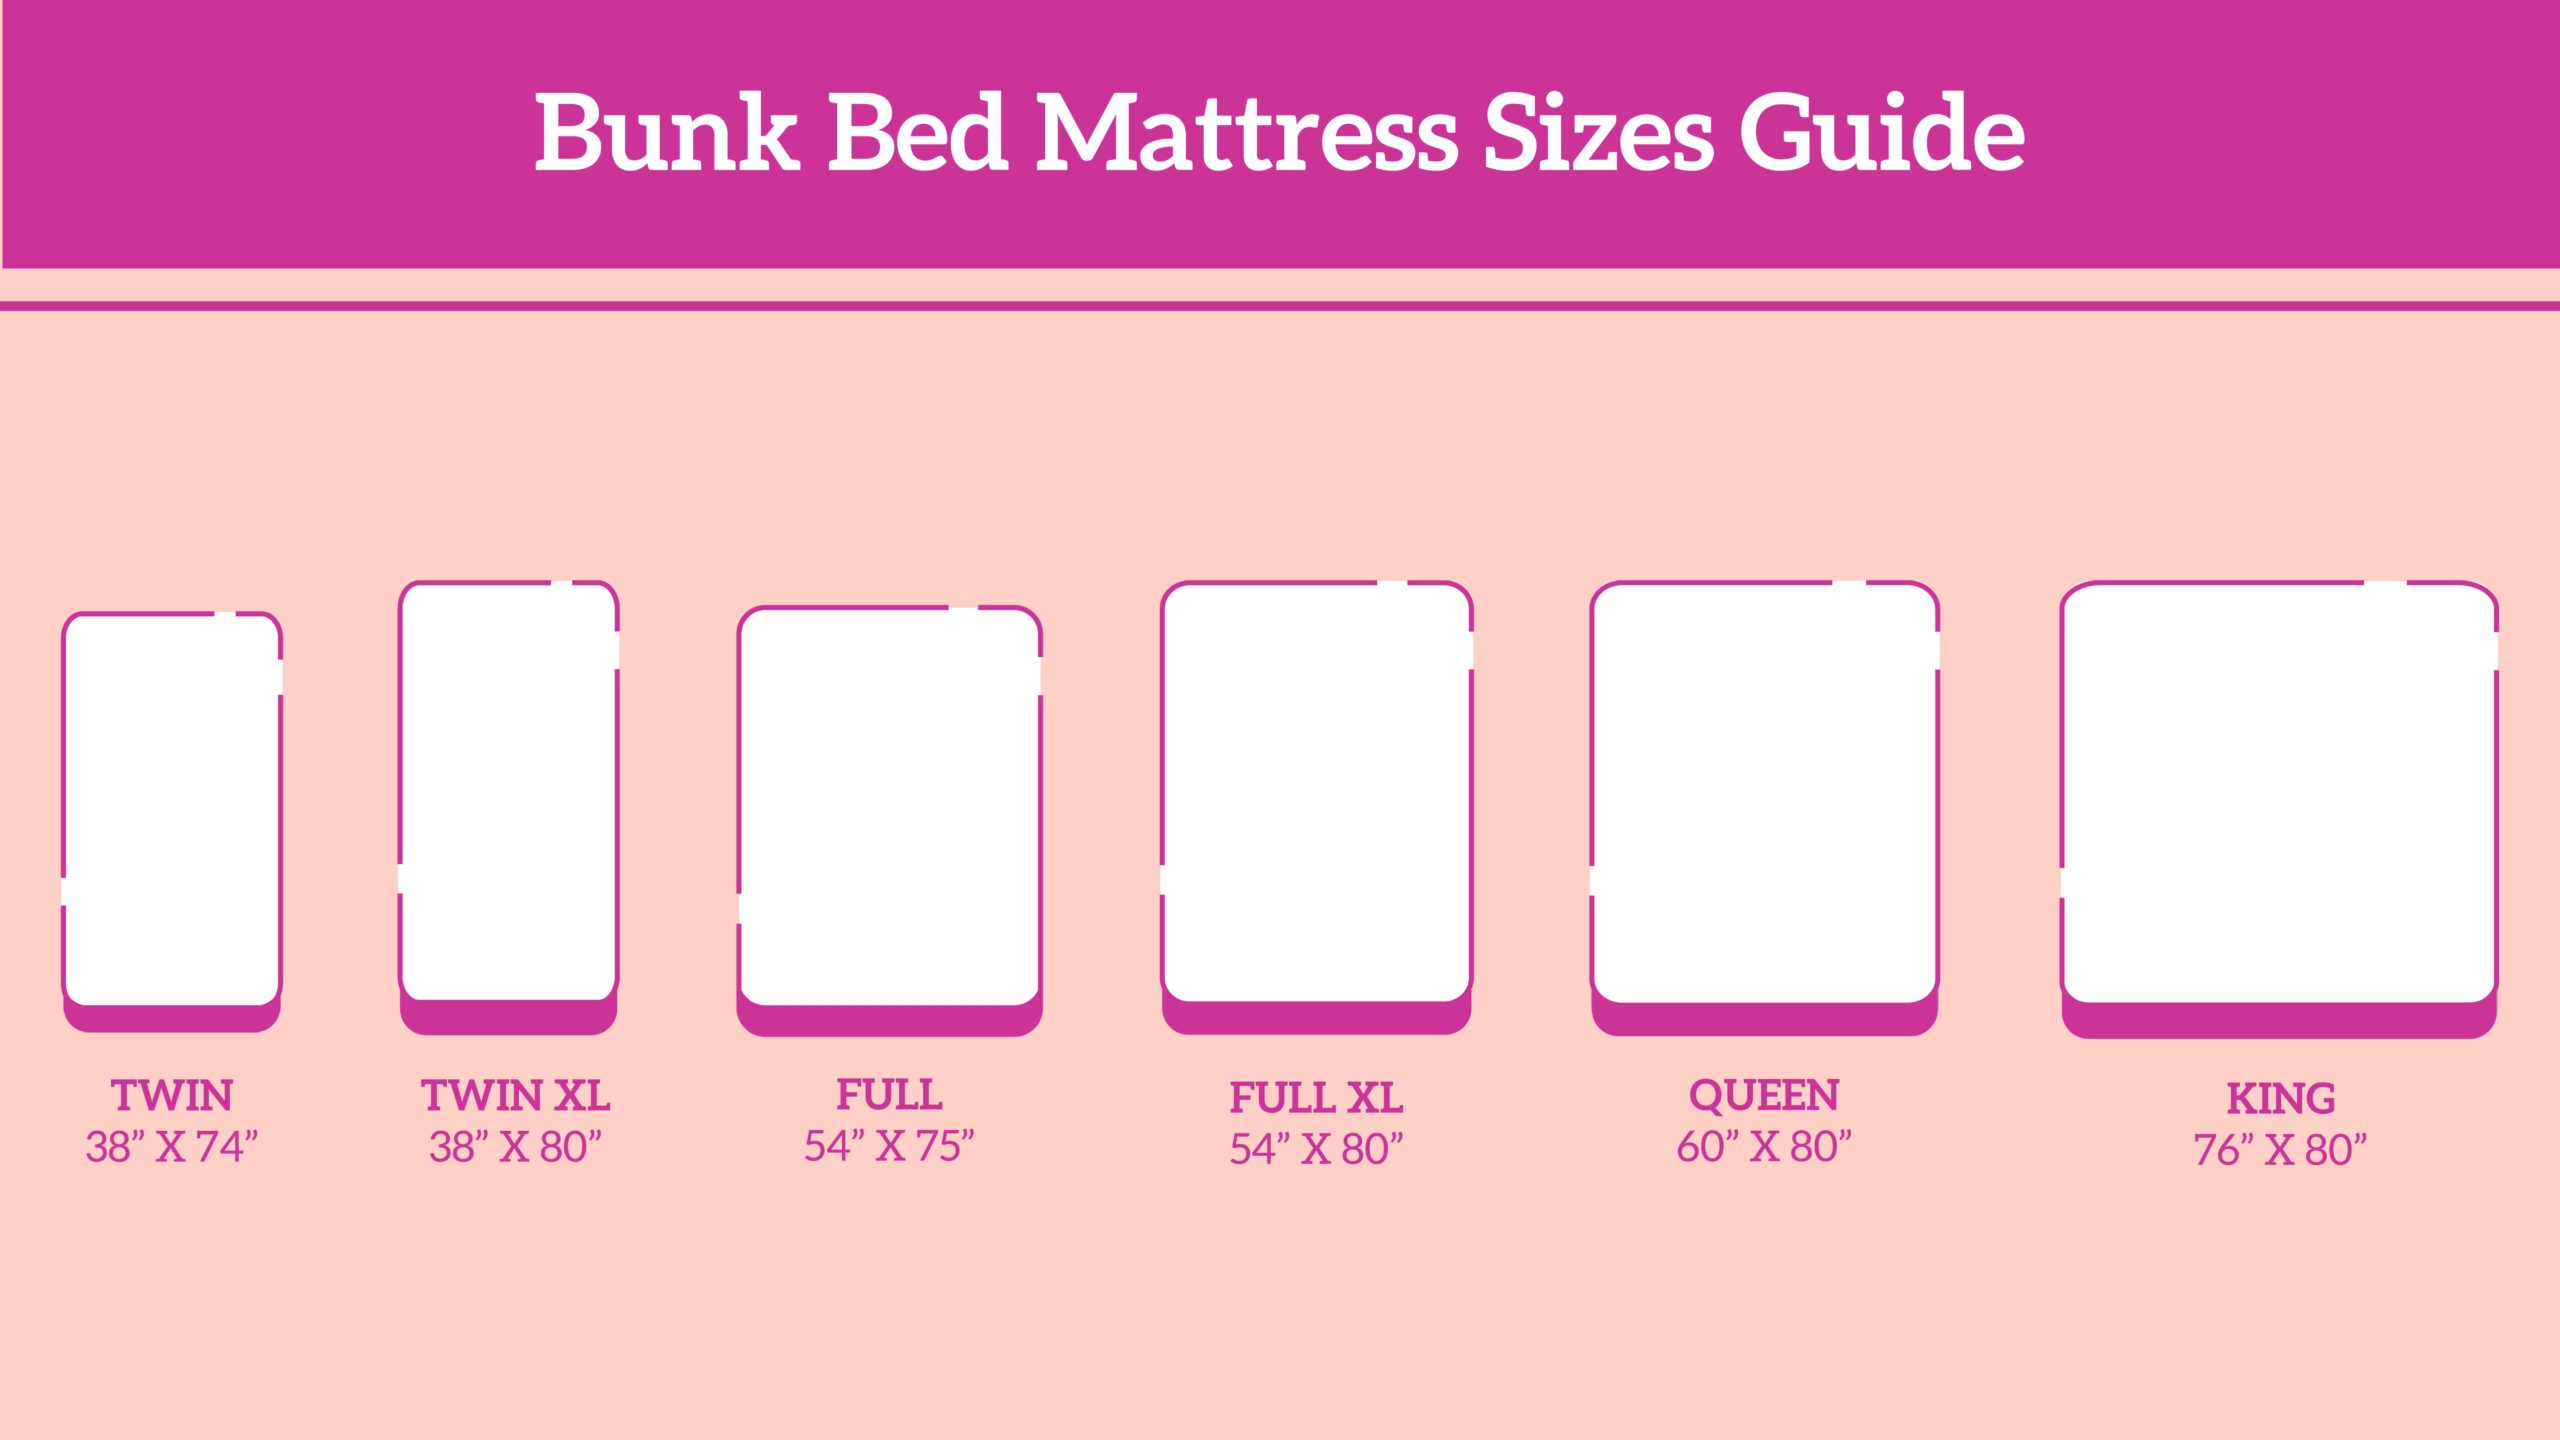 Bunk Bed Mattress Sizes Guide Eachnight, King Size Bedding Dimensions In Inches